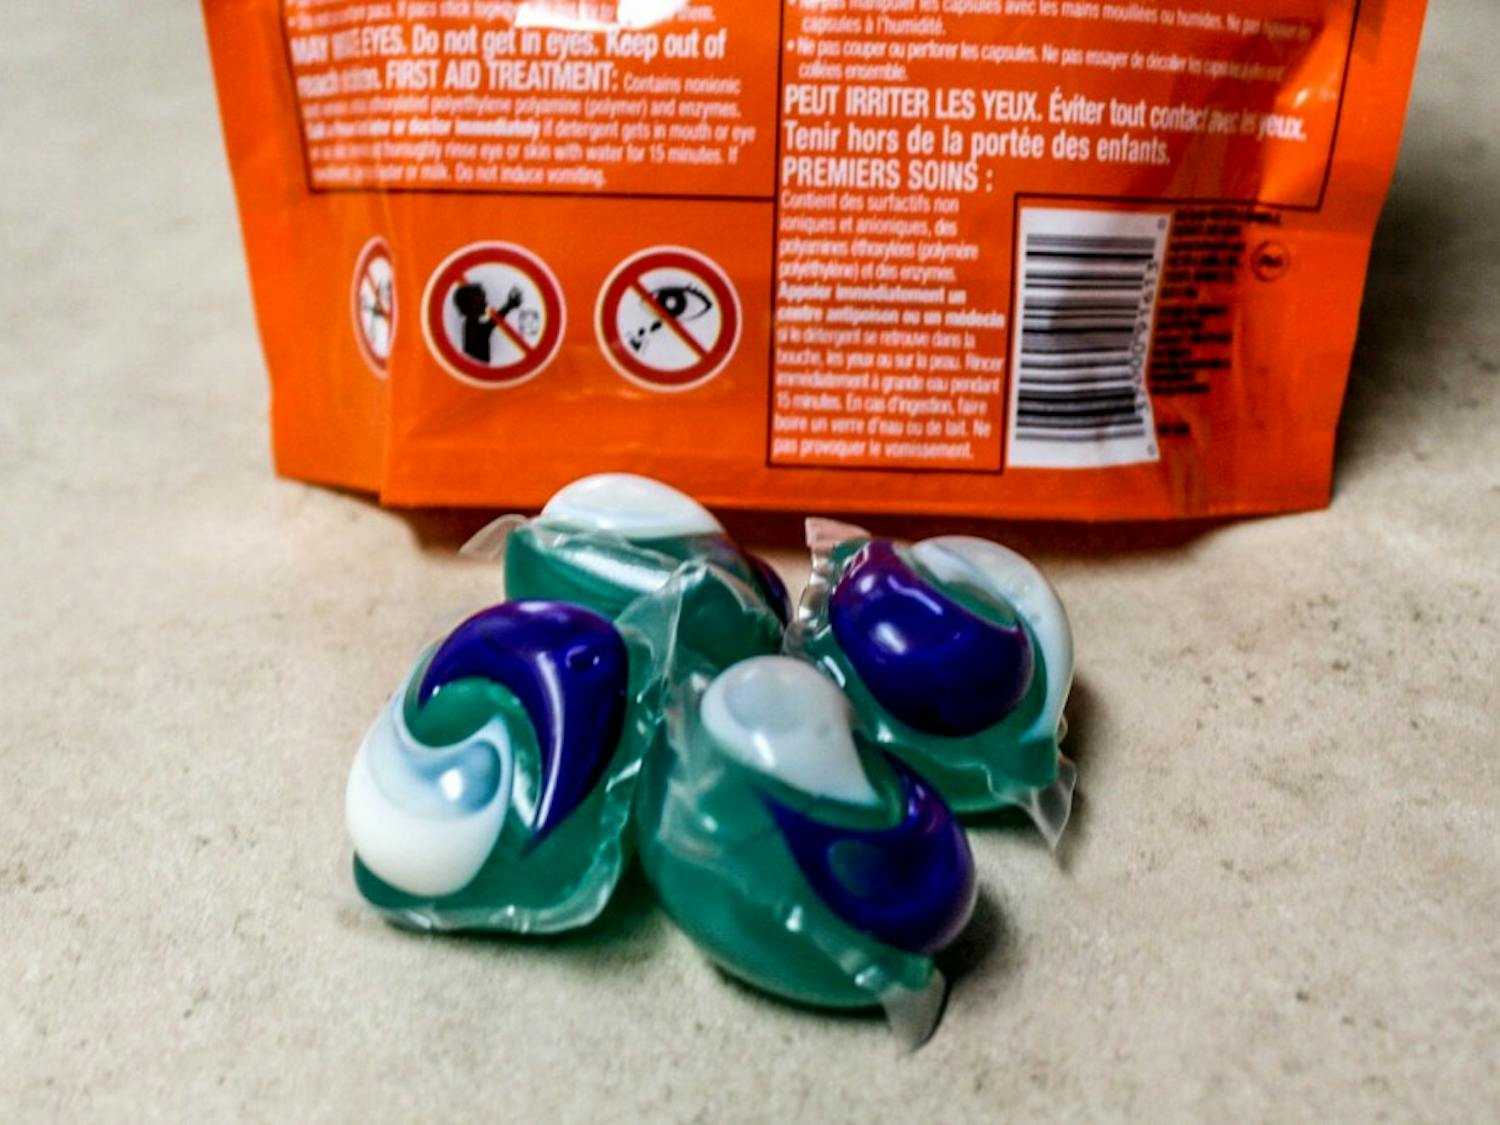 In 2018 alone, 134 cases of intentional exposure to laundry pods have been reported in the 13-19 age group. The spike comes in the wake of the "Tide Pod Challenge," a recent trend looking for participants to consume the dangerous substances.